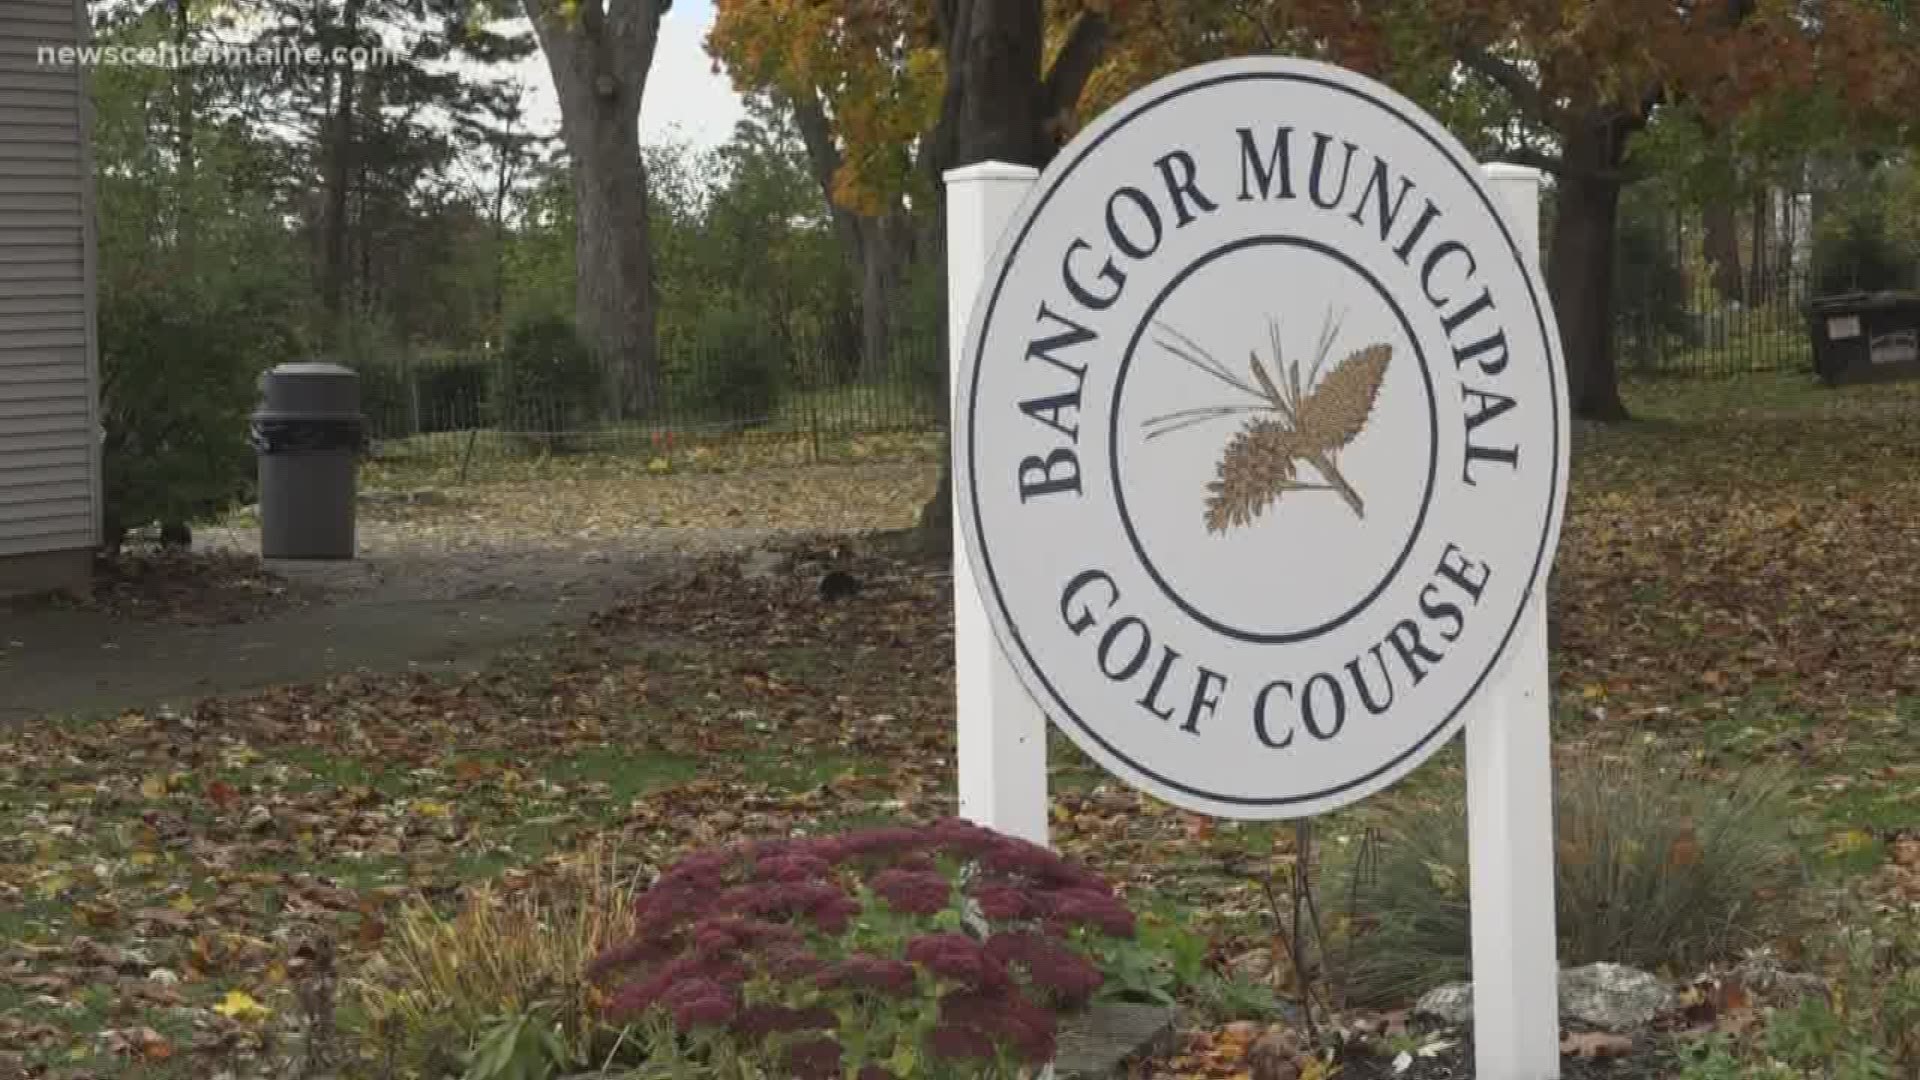 Bangor Municipal Golf Course ends its golf season with some environmentally friendly decisions.